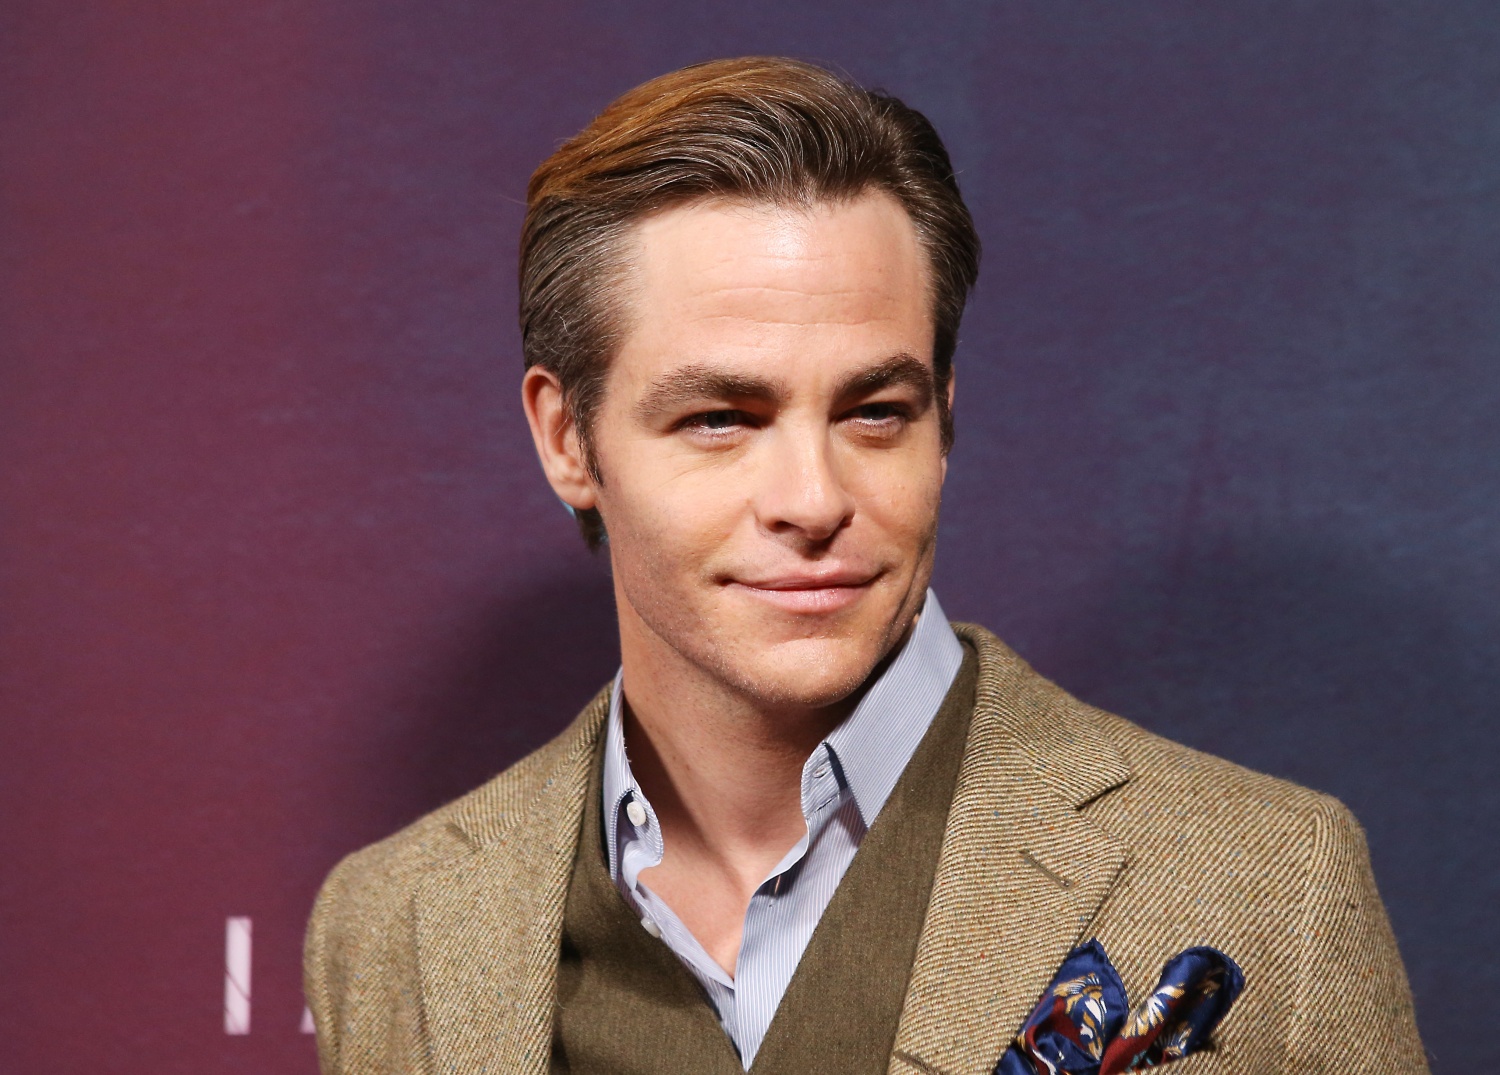 Chris Pine attends the Los Angeles premiere of TNT's "I Am The Night" held at Harmony Gold on January 24, 2019 in Los Angeles, California. (Photo by Michael Tran/FilmMagic,,)